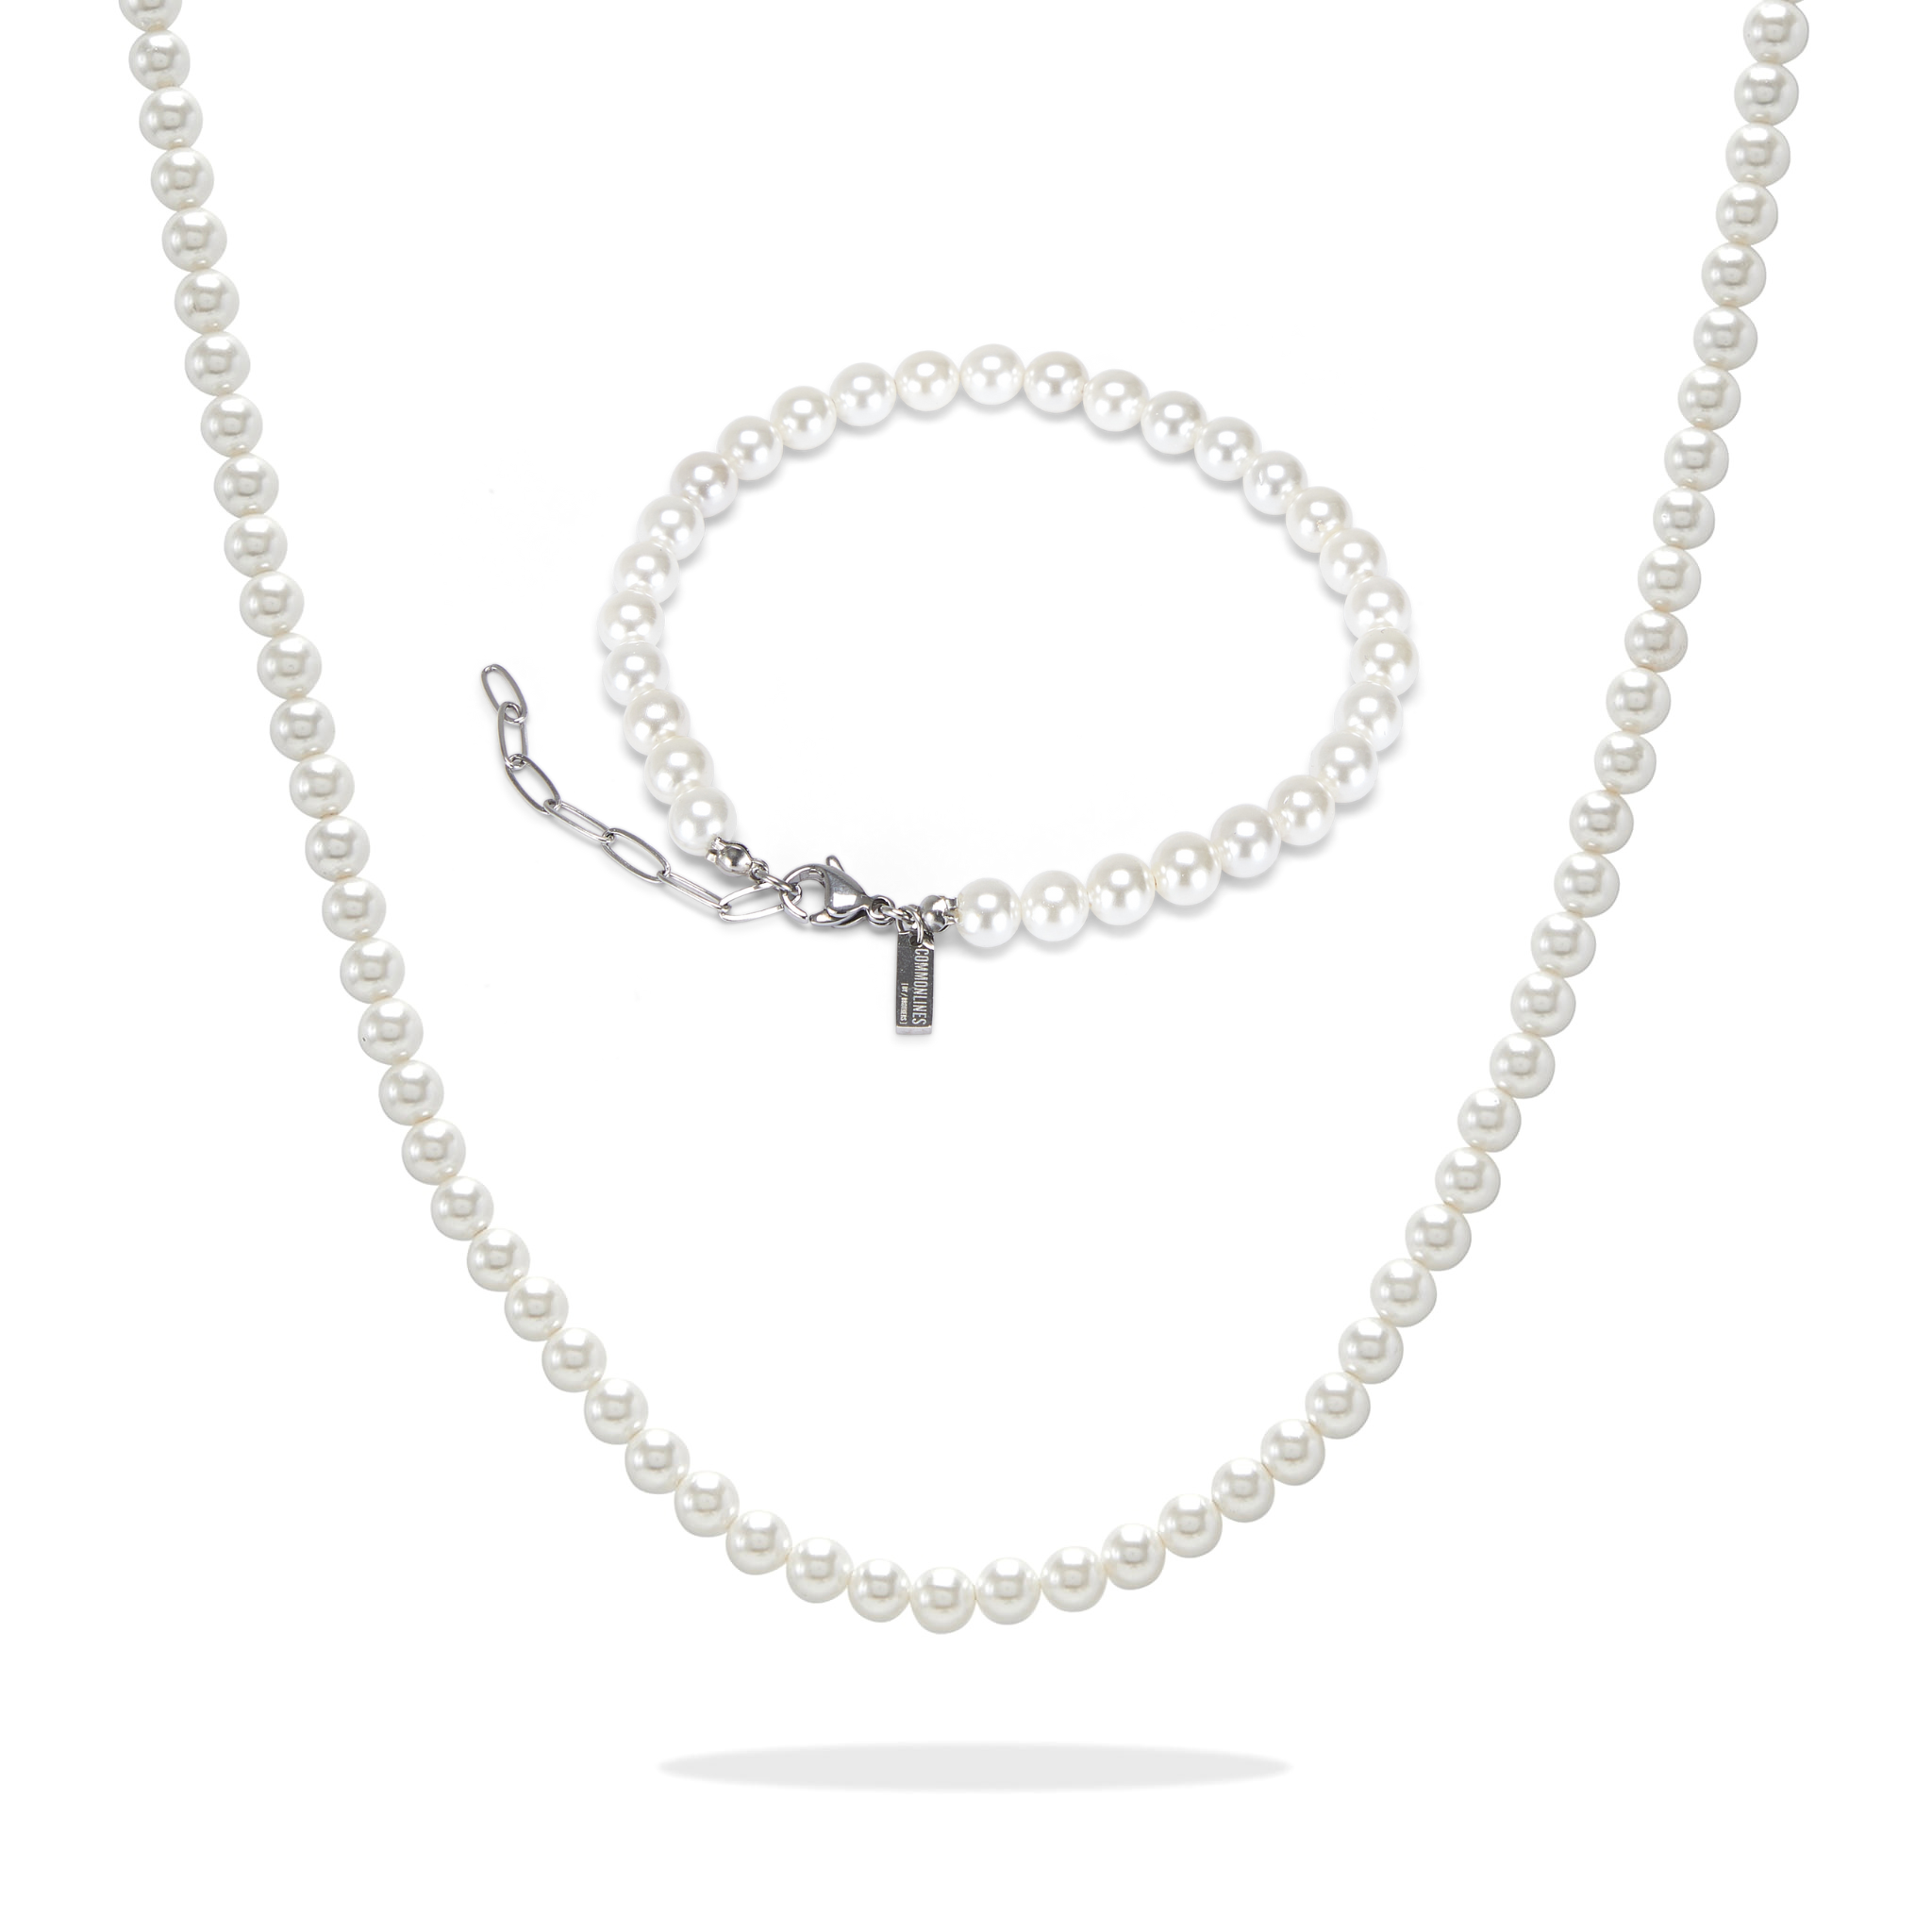 The Classic Pearl Set